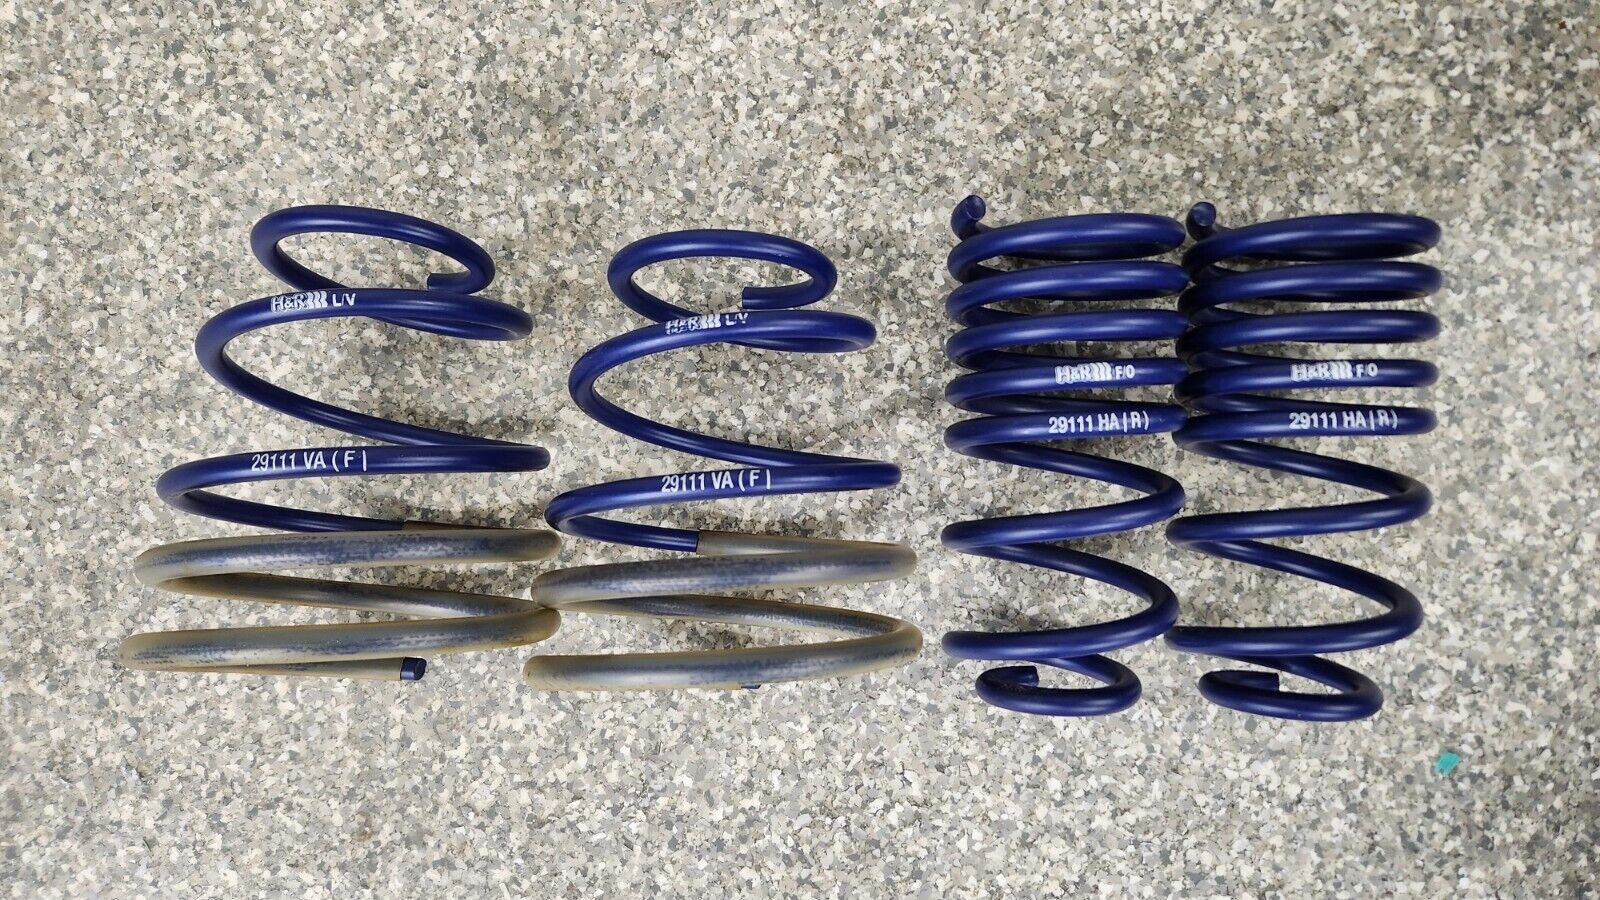 H&R LOWERING SPORT SPRINGS FOR PORSCHE 997 911 TURBO COUPE & CABRIOLET 29111-1